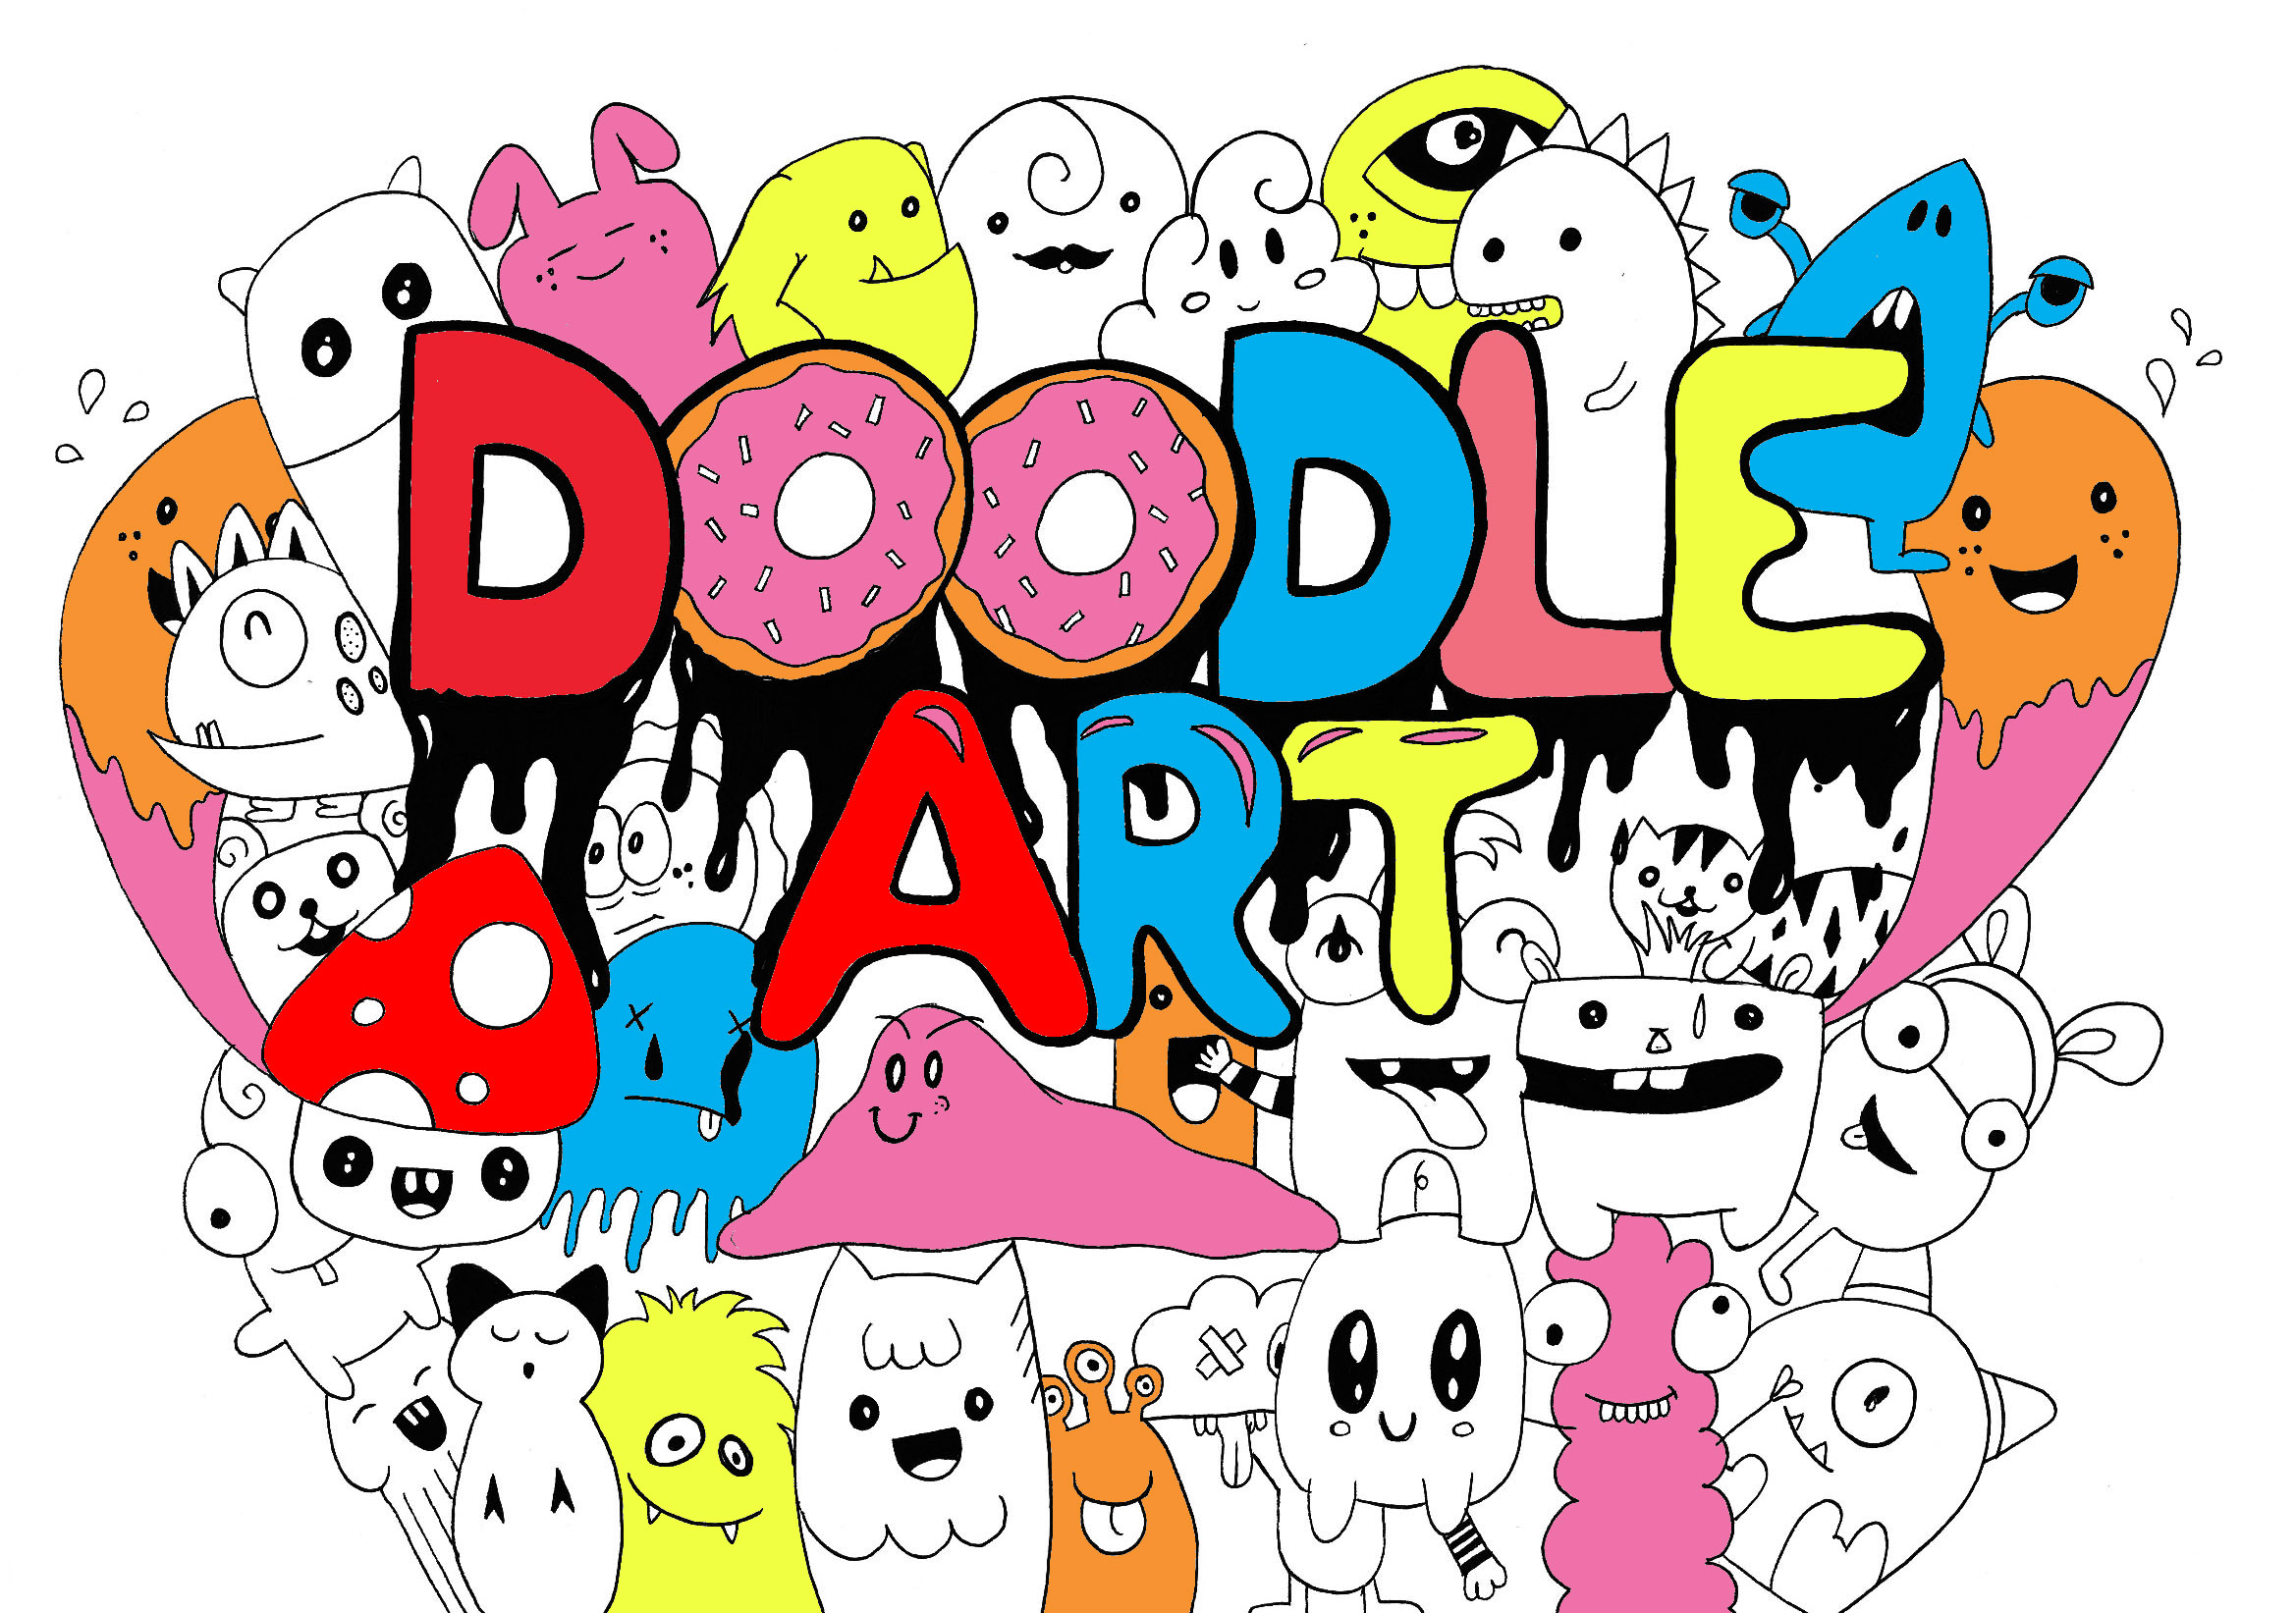 Doodle art doodling 9 | Doodling / Doodle art - Coloring pages for